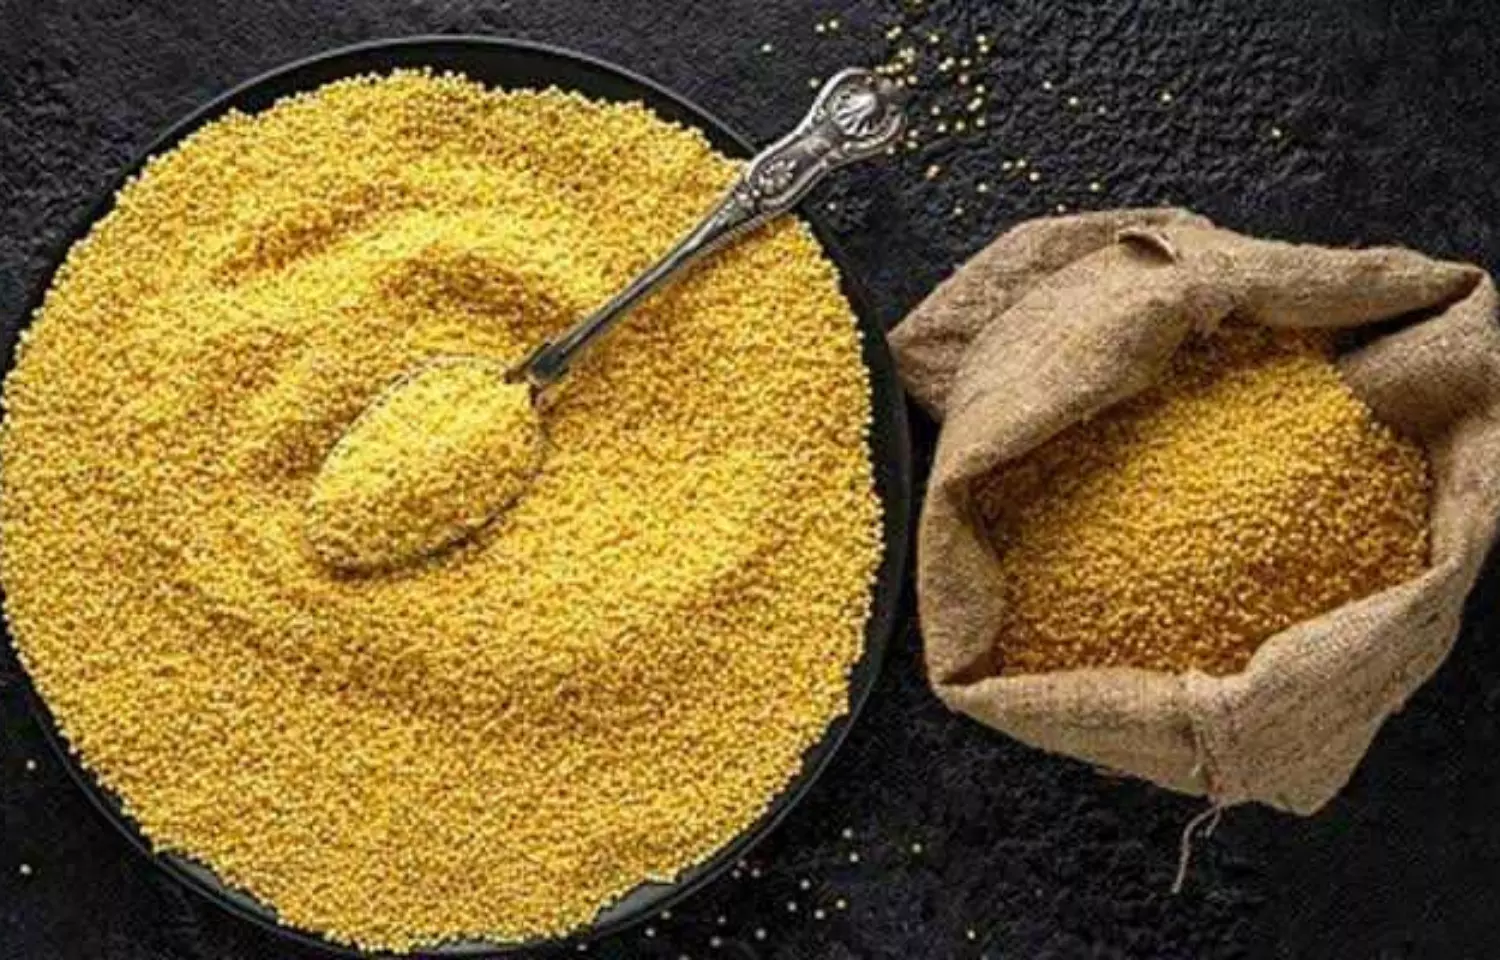 Millets consumption lowers cholesterol, obesity and CVD risk: Study